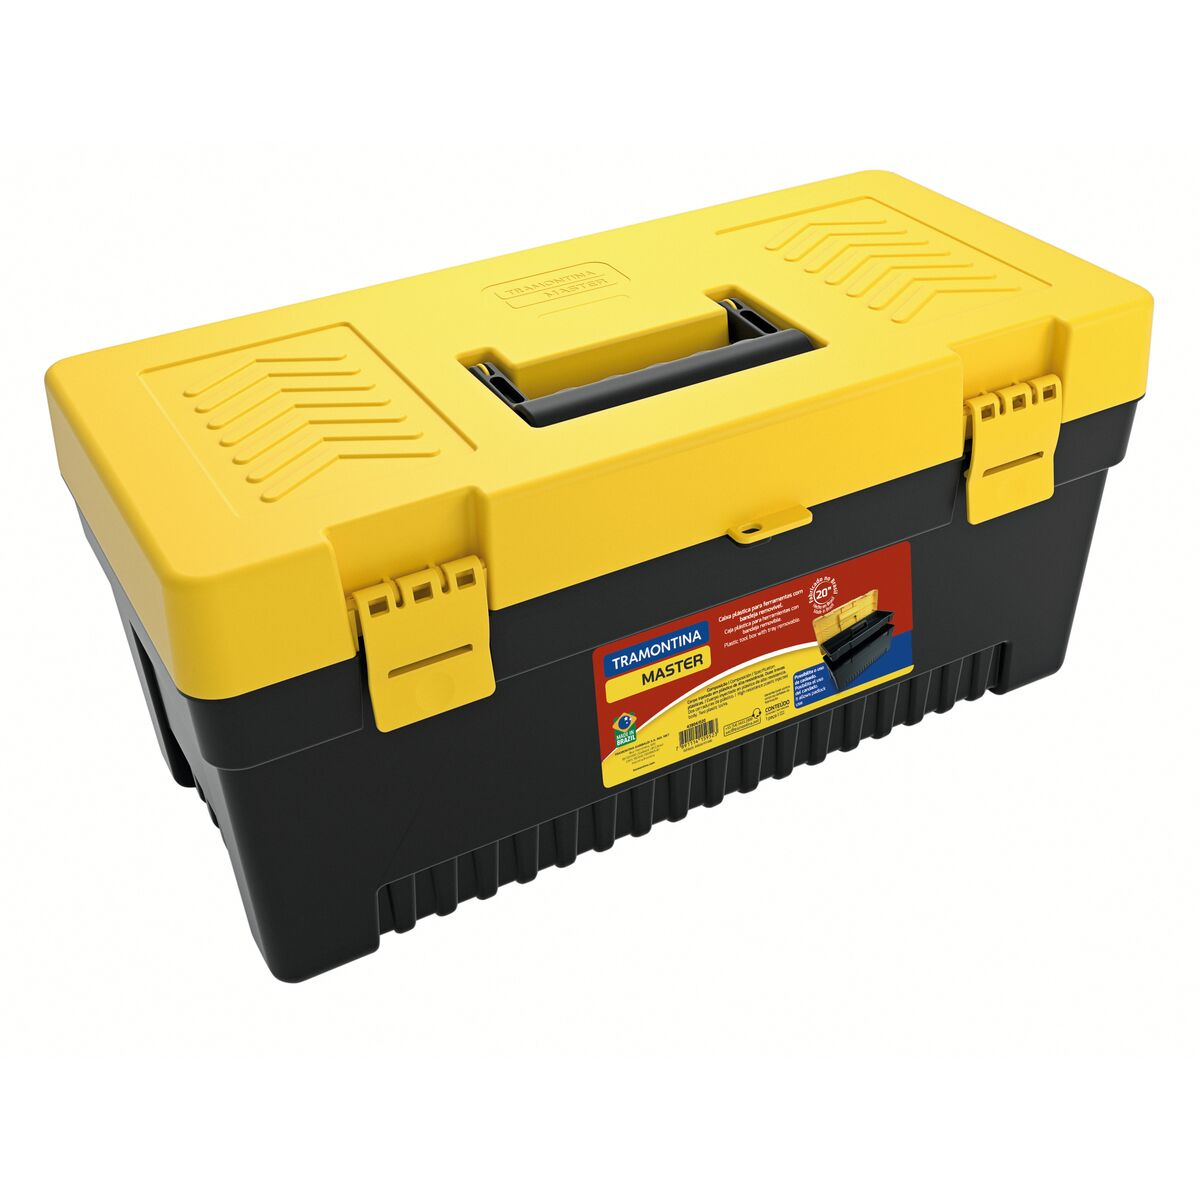 20" Plastic Tool Box with plastic tray removable